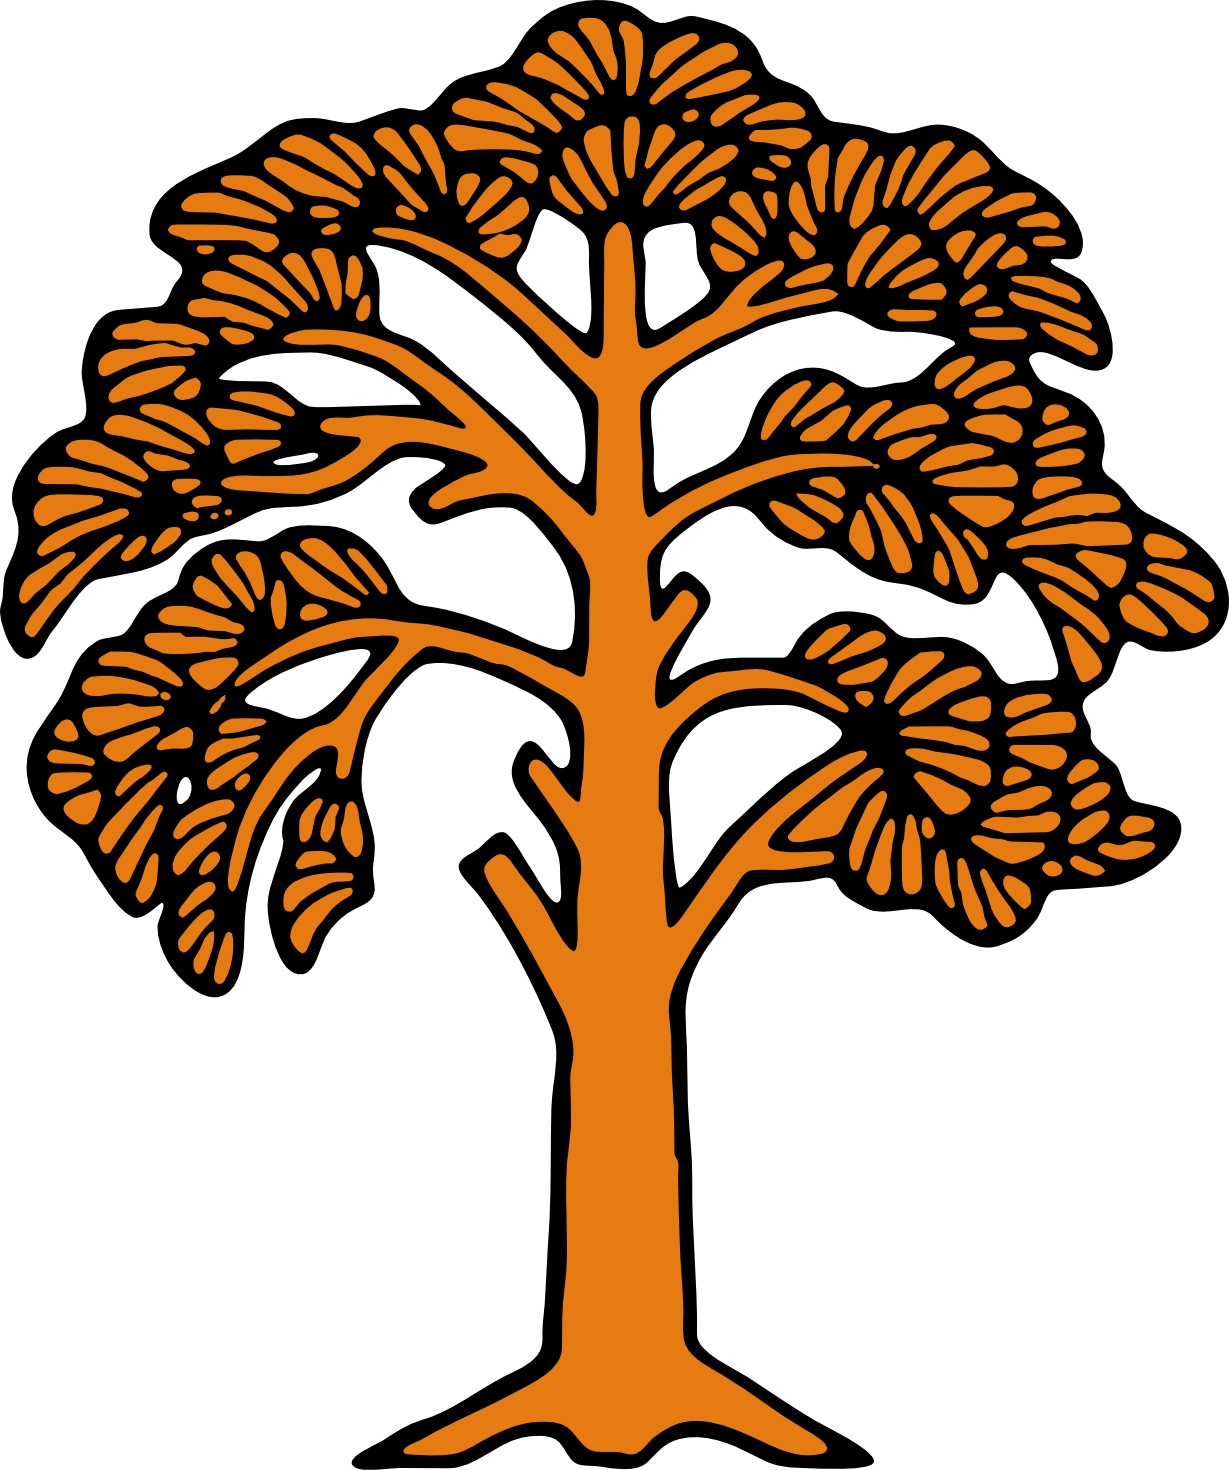 Tree Silhouette Png - ClipArt Best